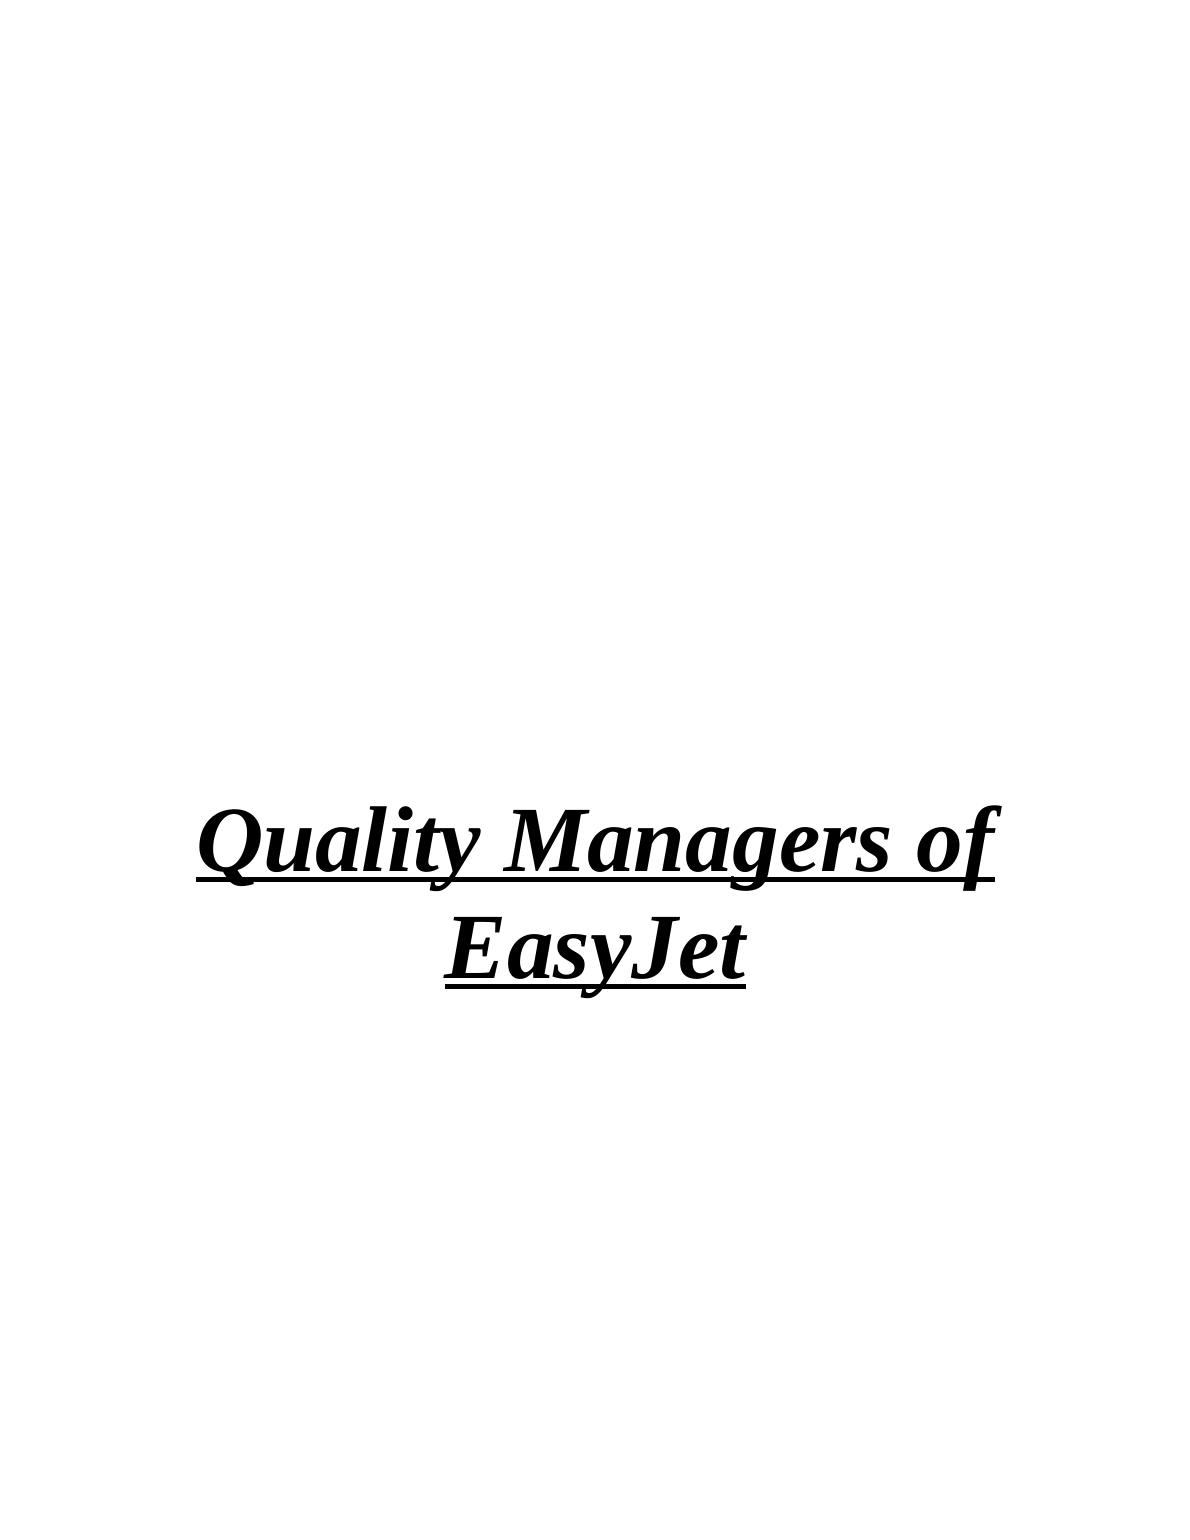 Quality Managers of EasyJet_1